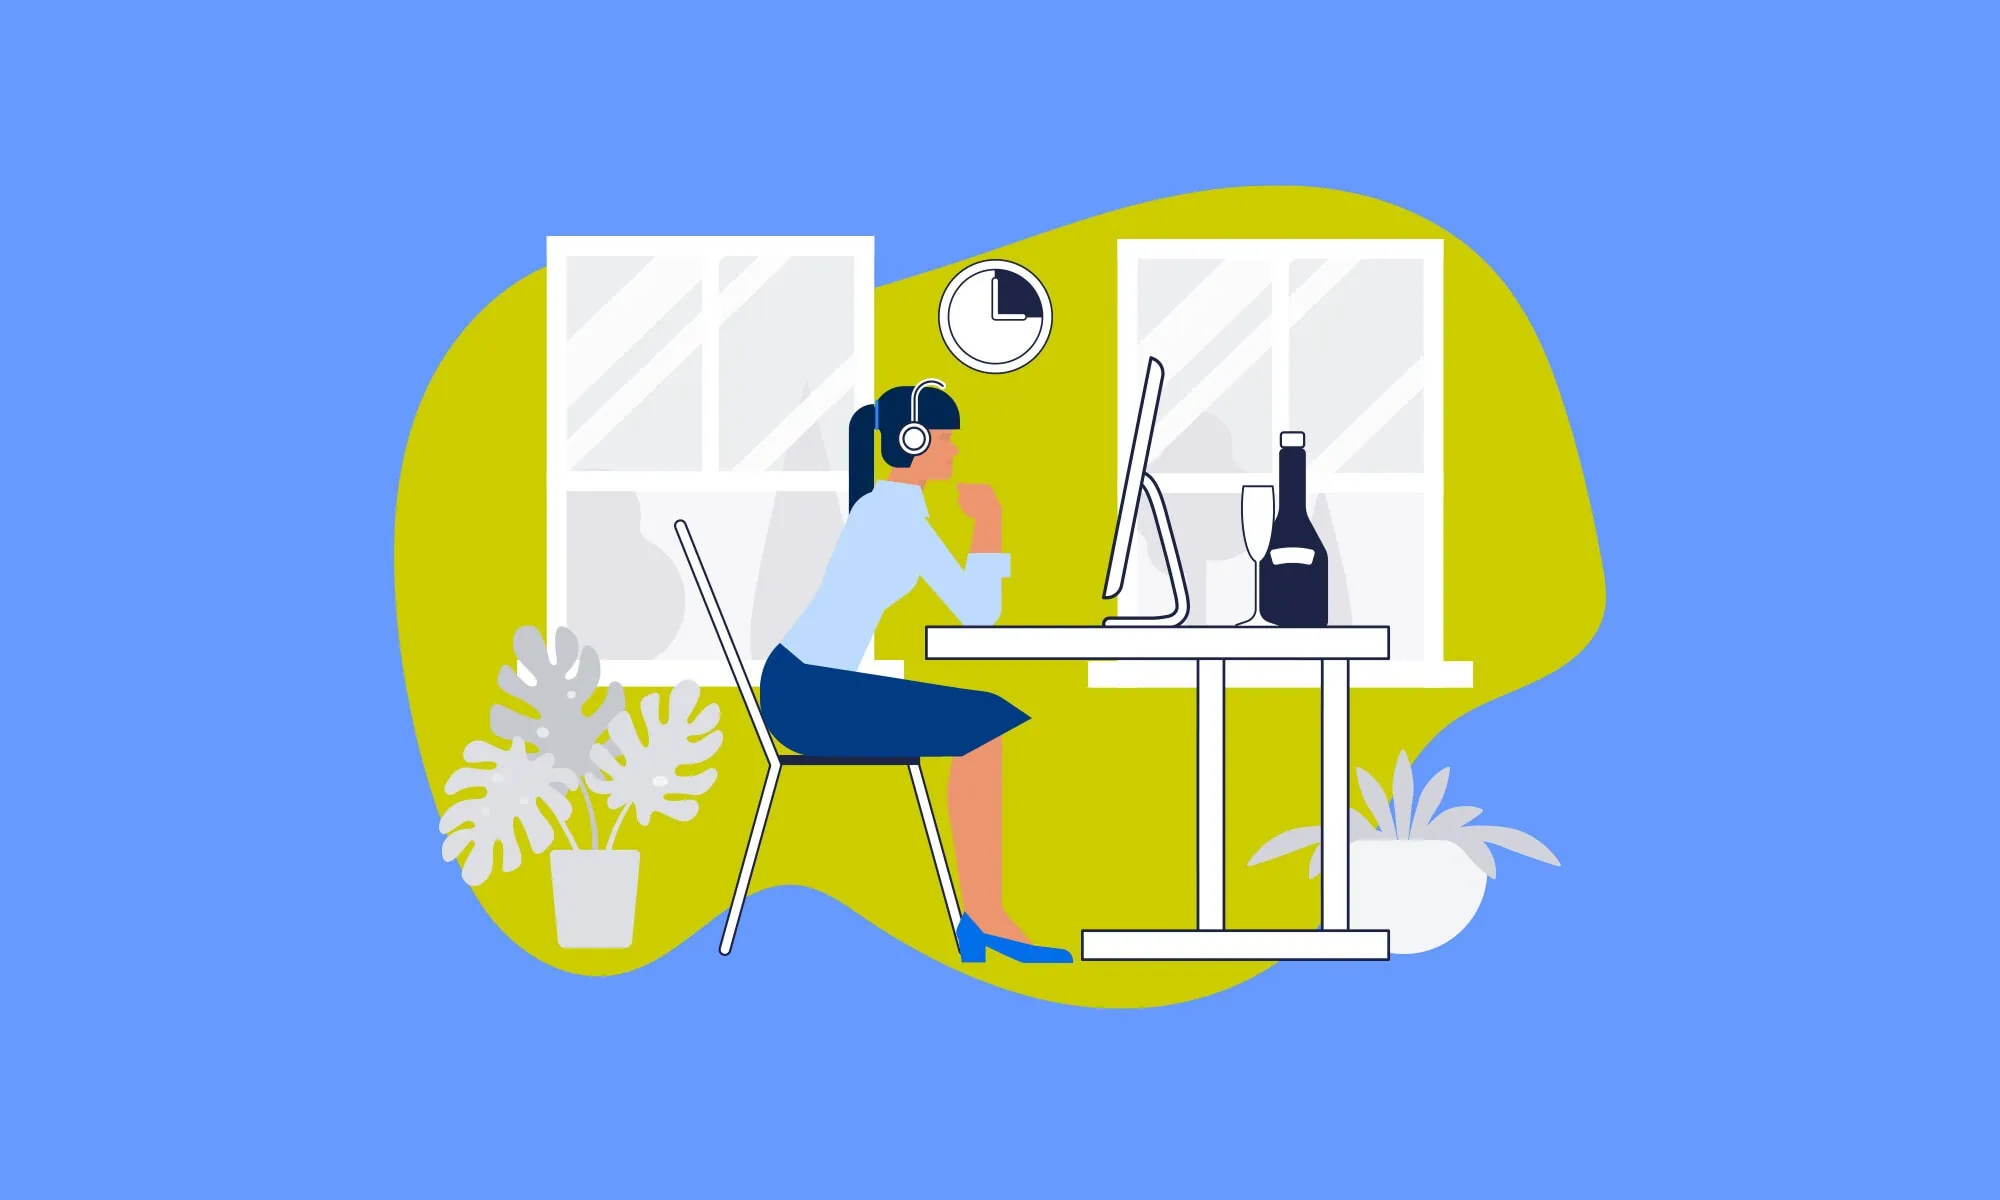 illustration of a woman seated at desk looking at computer. She is wearing headphones and appears to be in a home office surrounded by windows and plants. The background is bright blue with an abstract green shape behind the illustration.